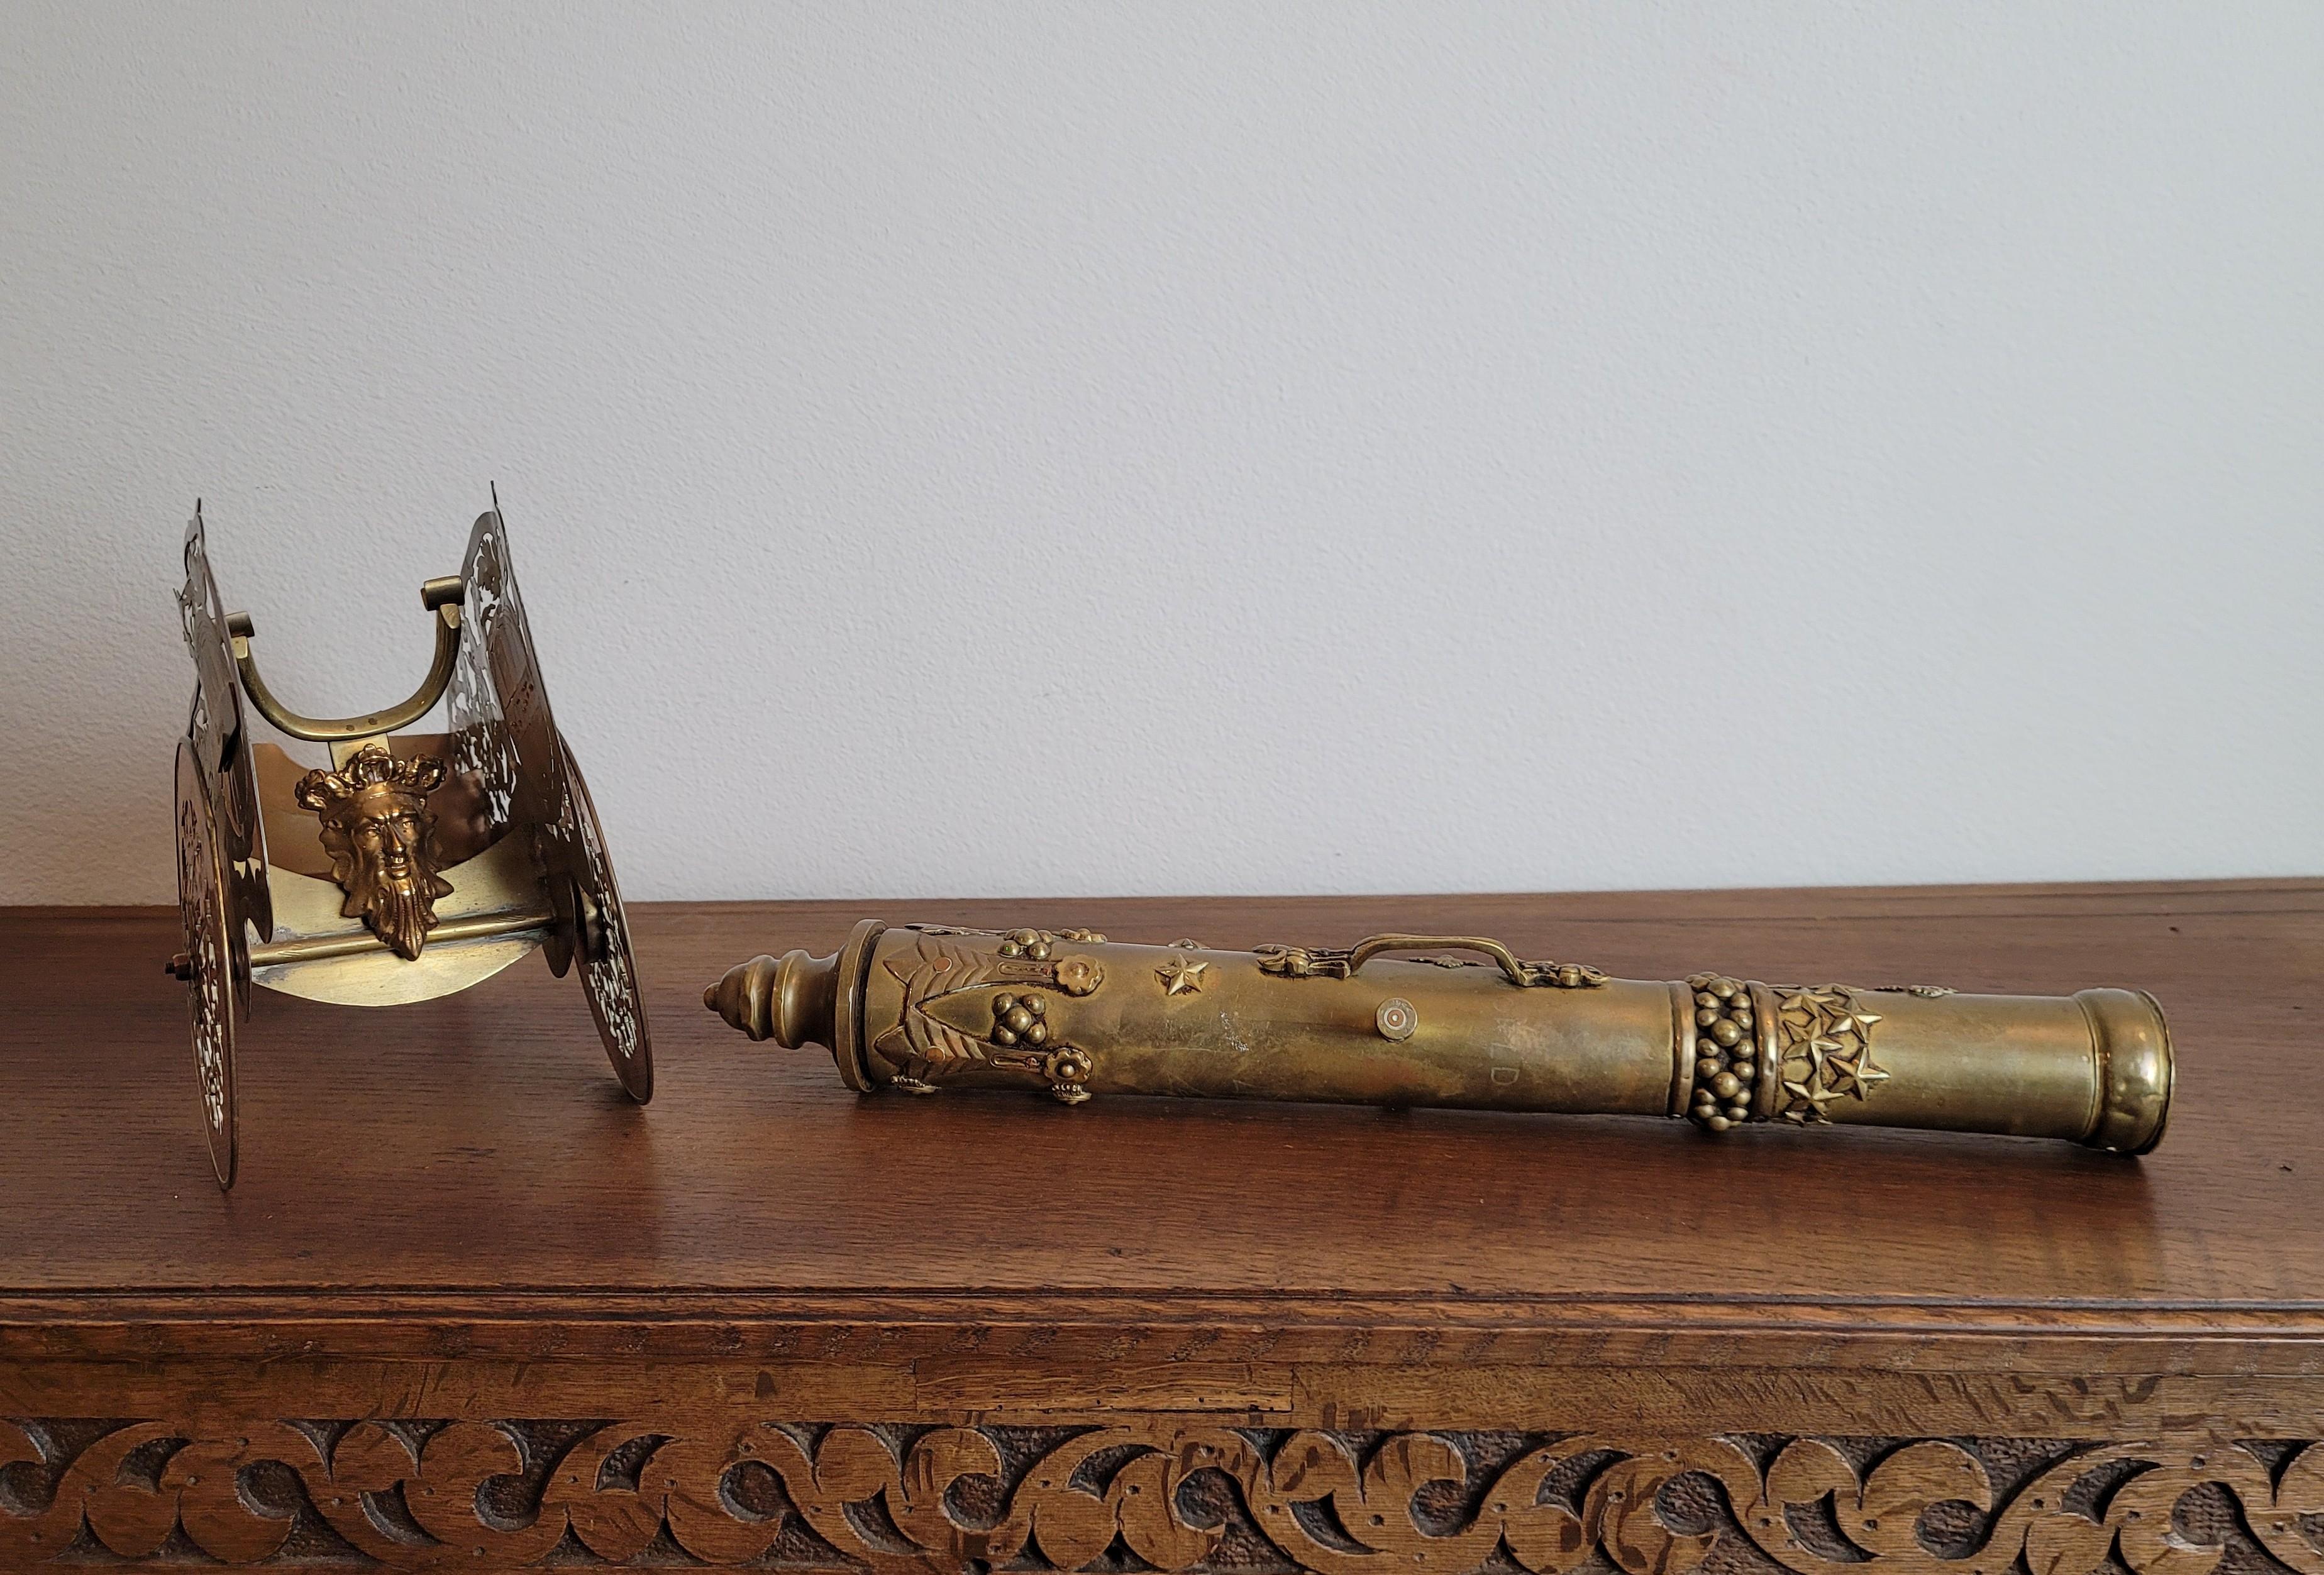 20th Century Large Antique English Trench Art Table Cannon For Sale